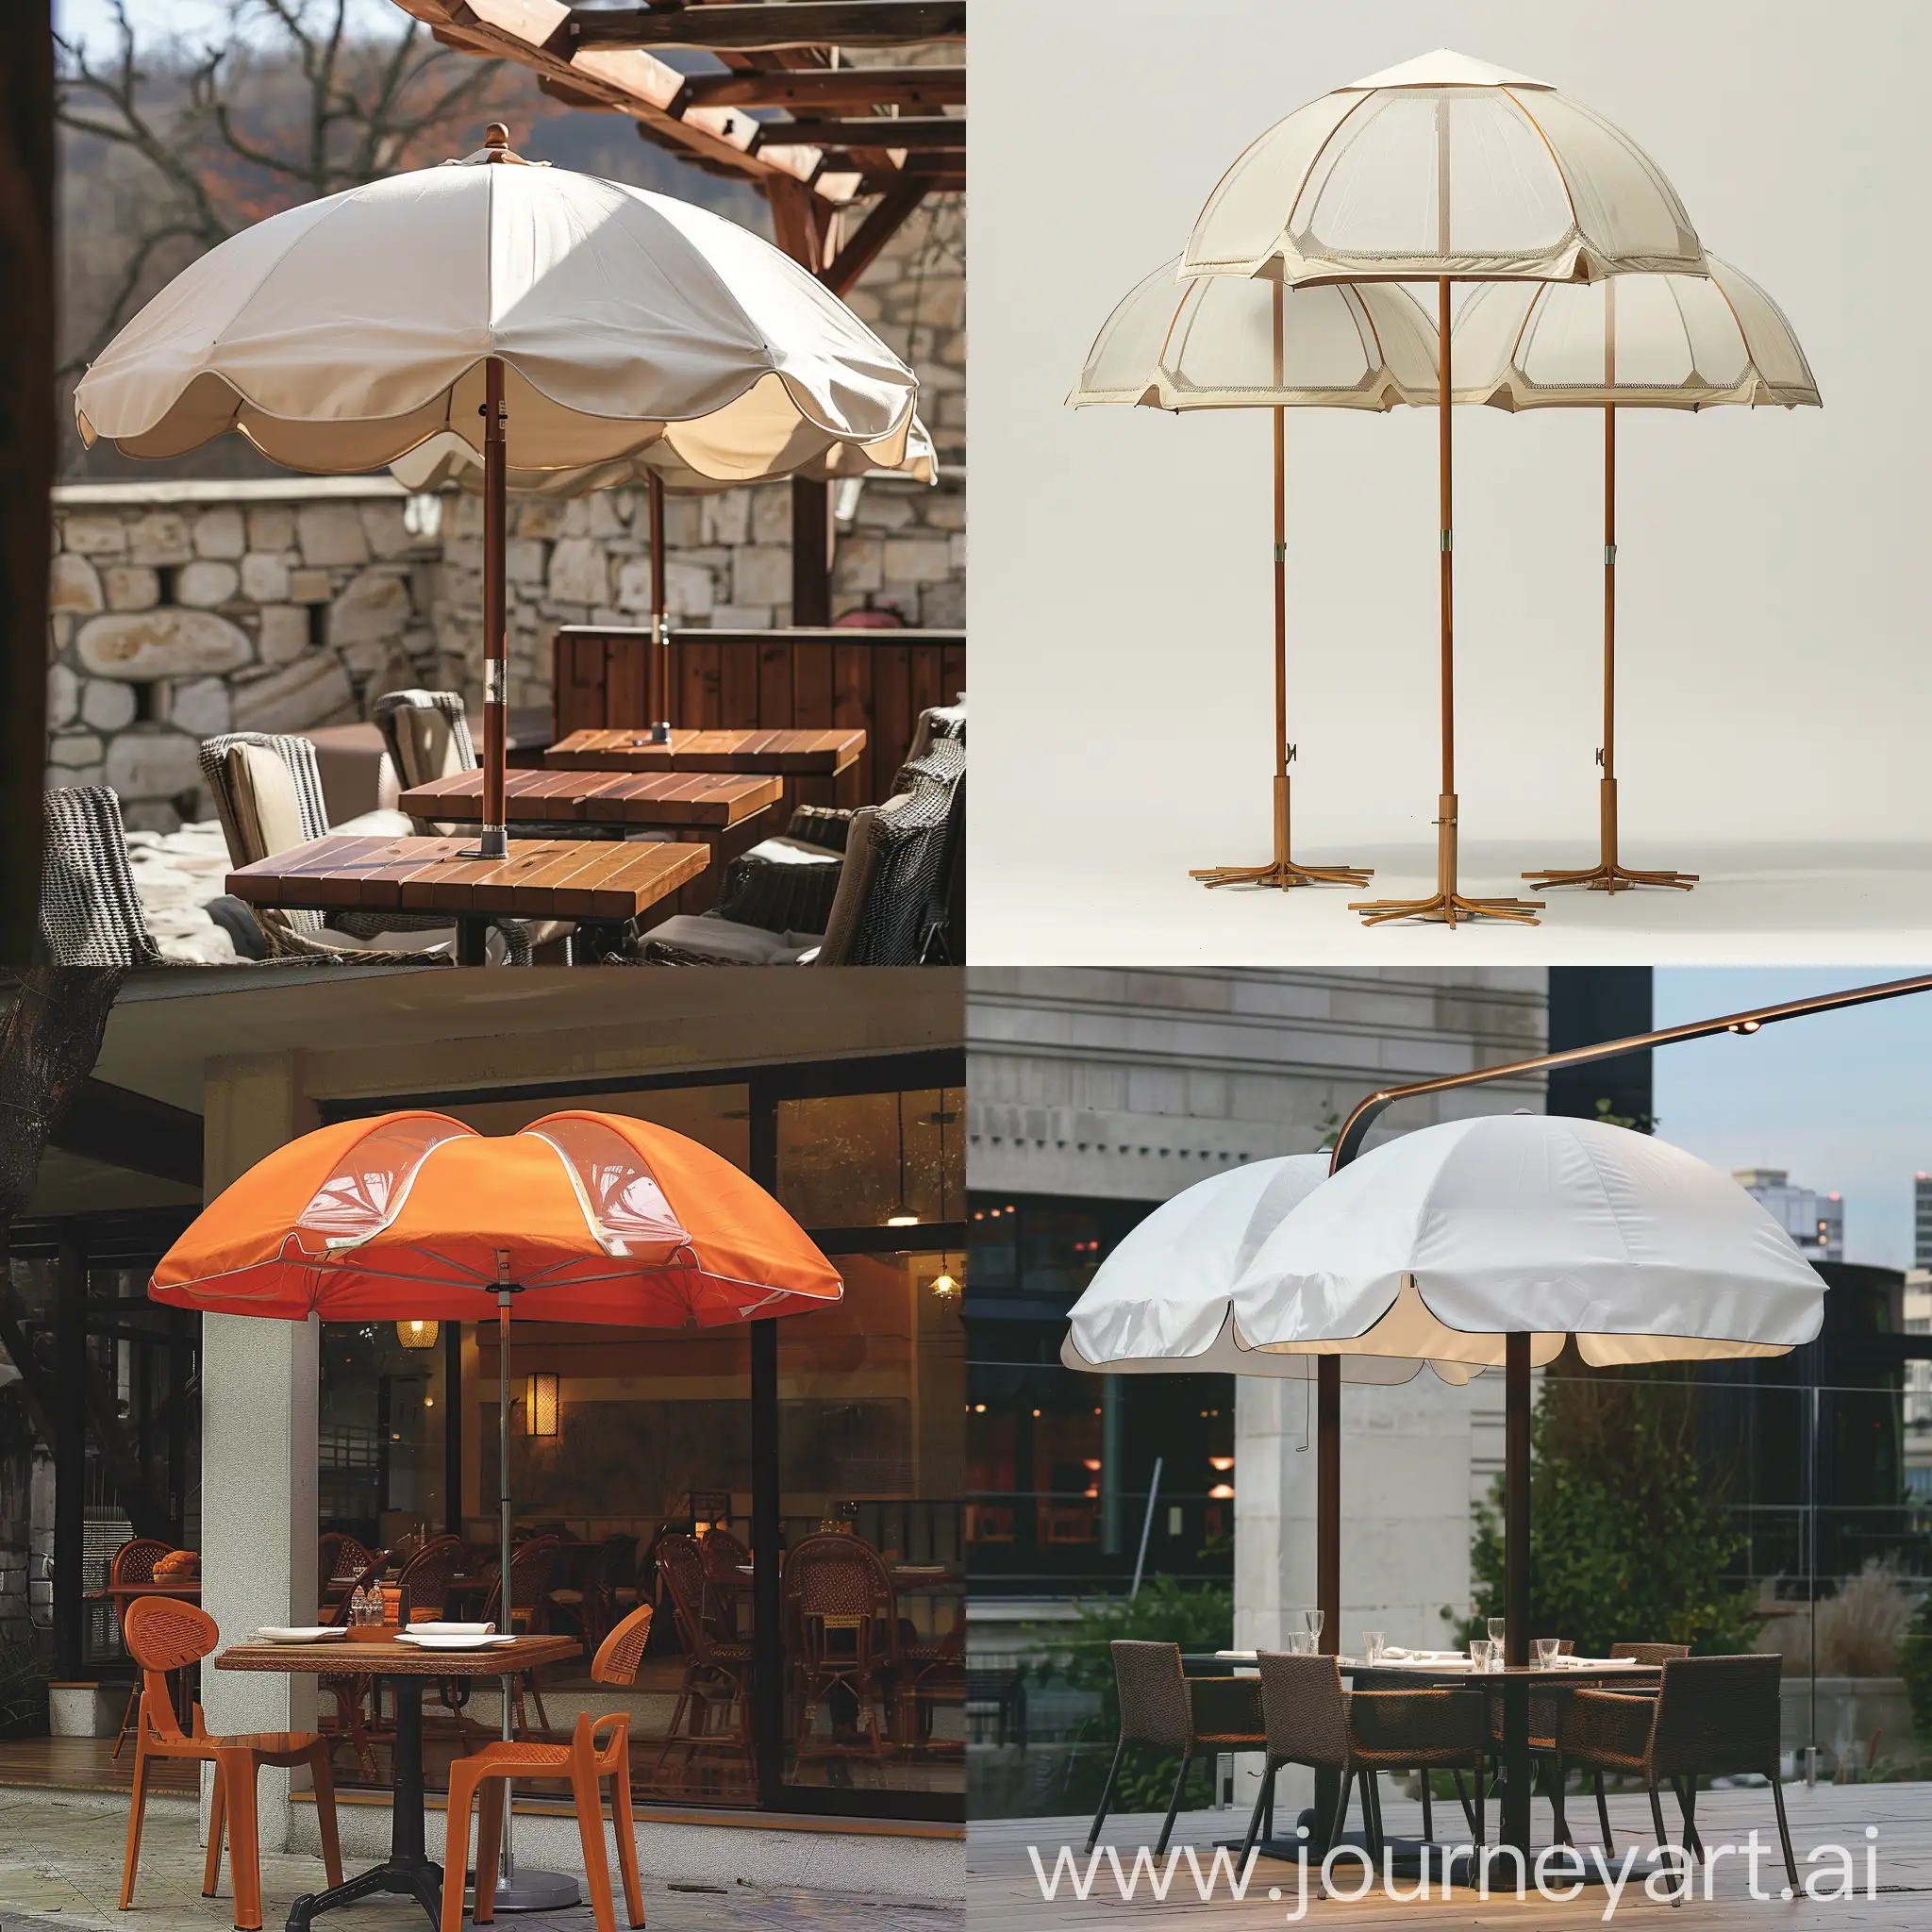 umbrella with two domes for the restaurant

